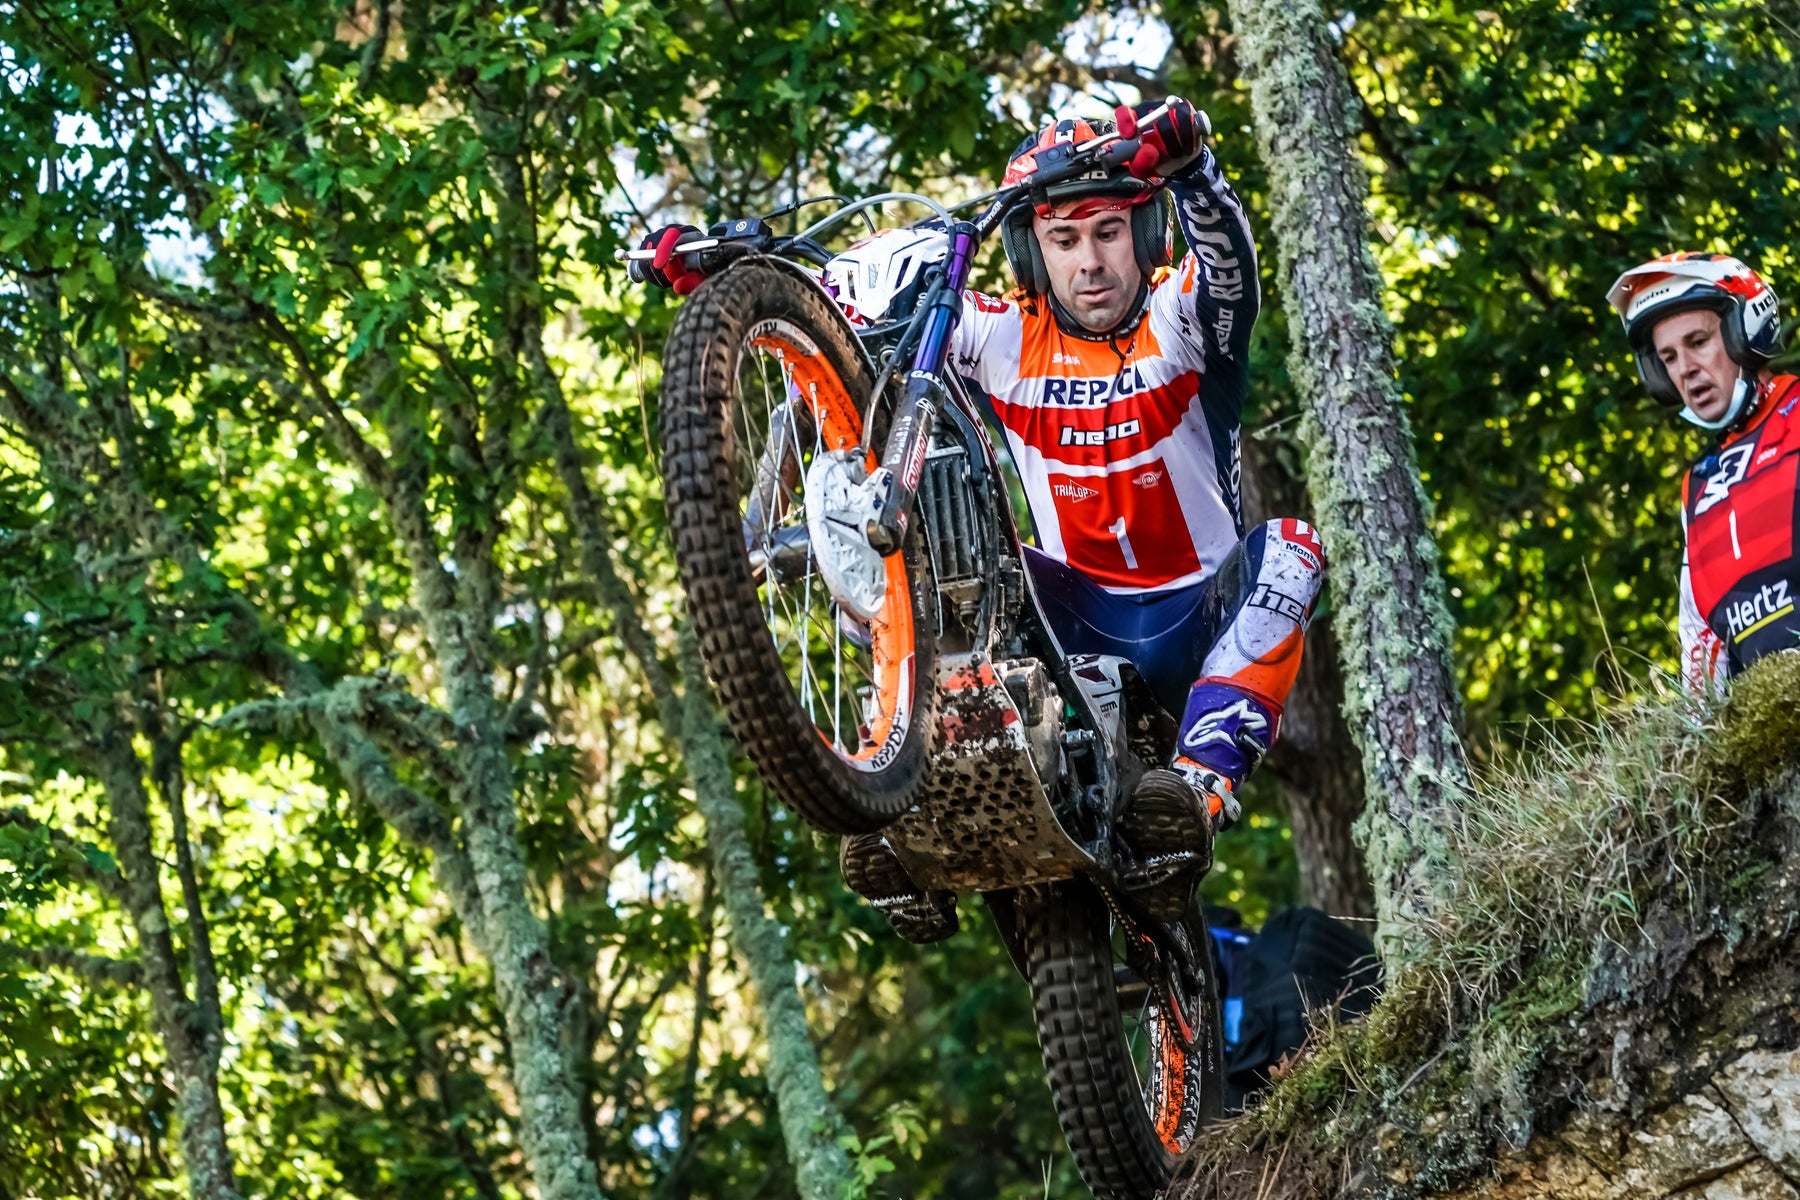 29 AND COUNTING: TONI BOU CROWNED 2021 FIM TRIALGP CHAMPION IN PORTUGAL